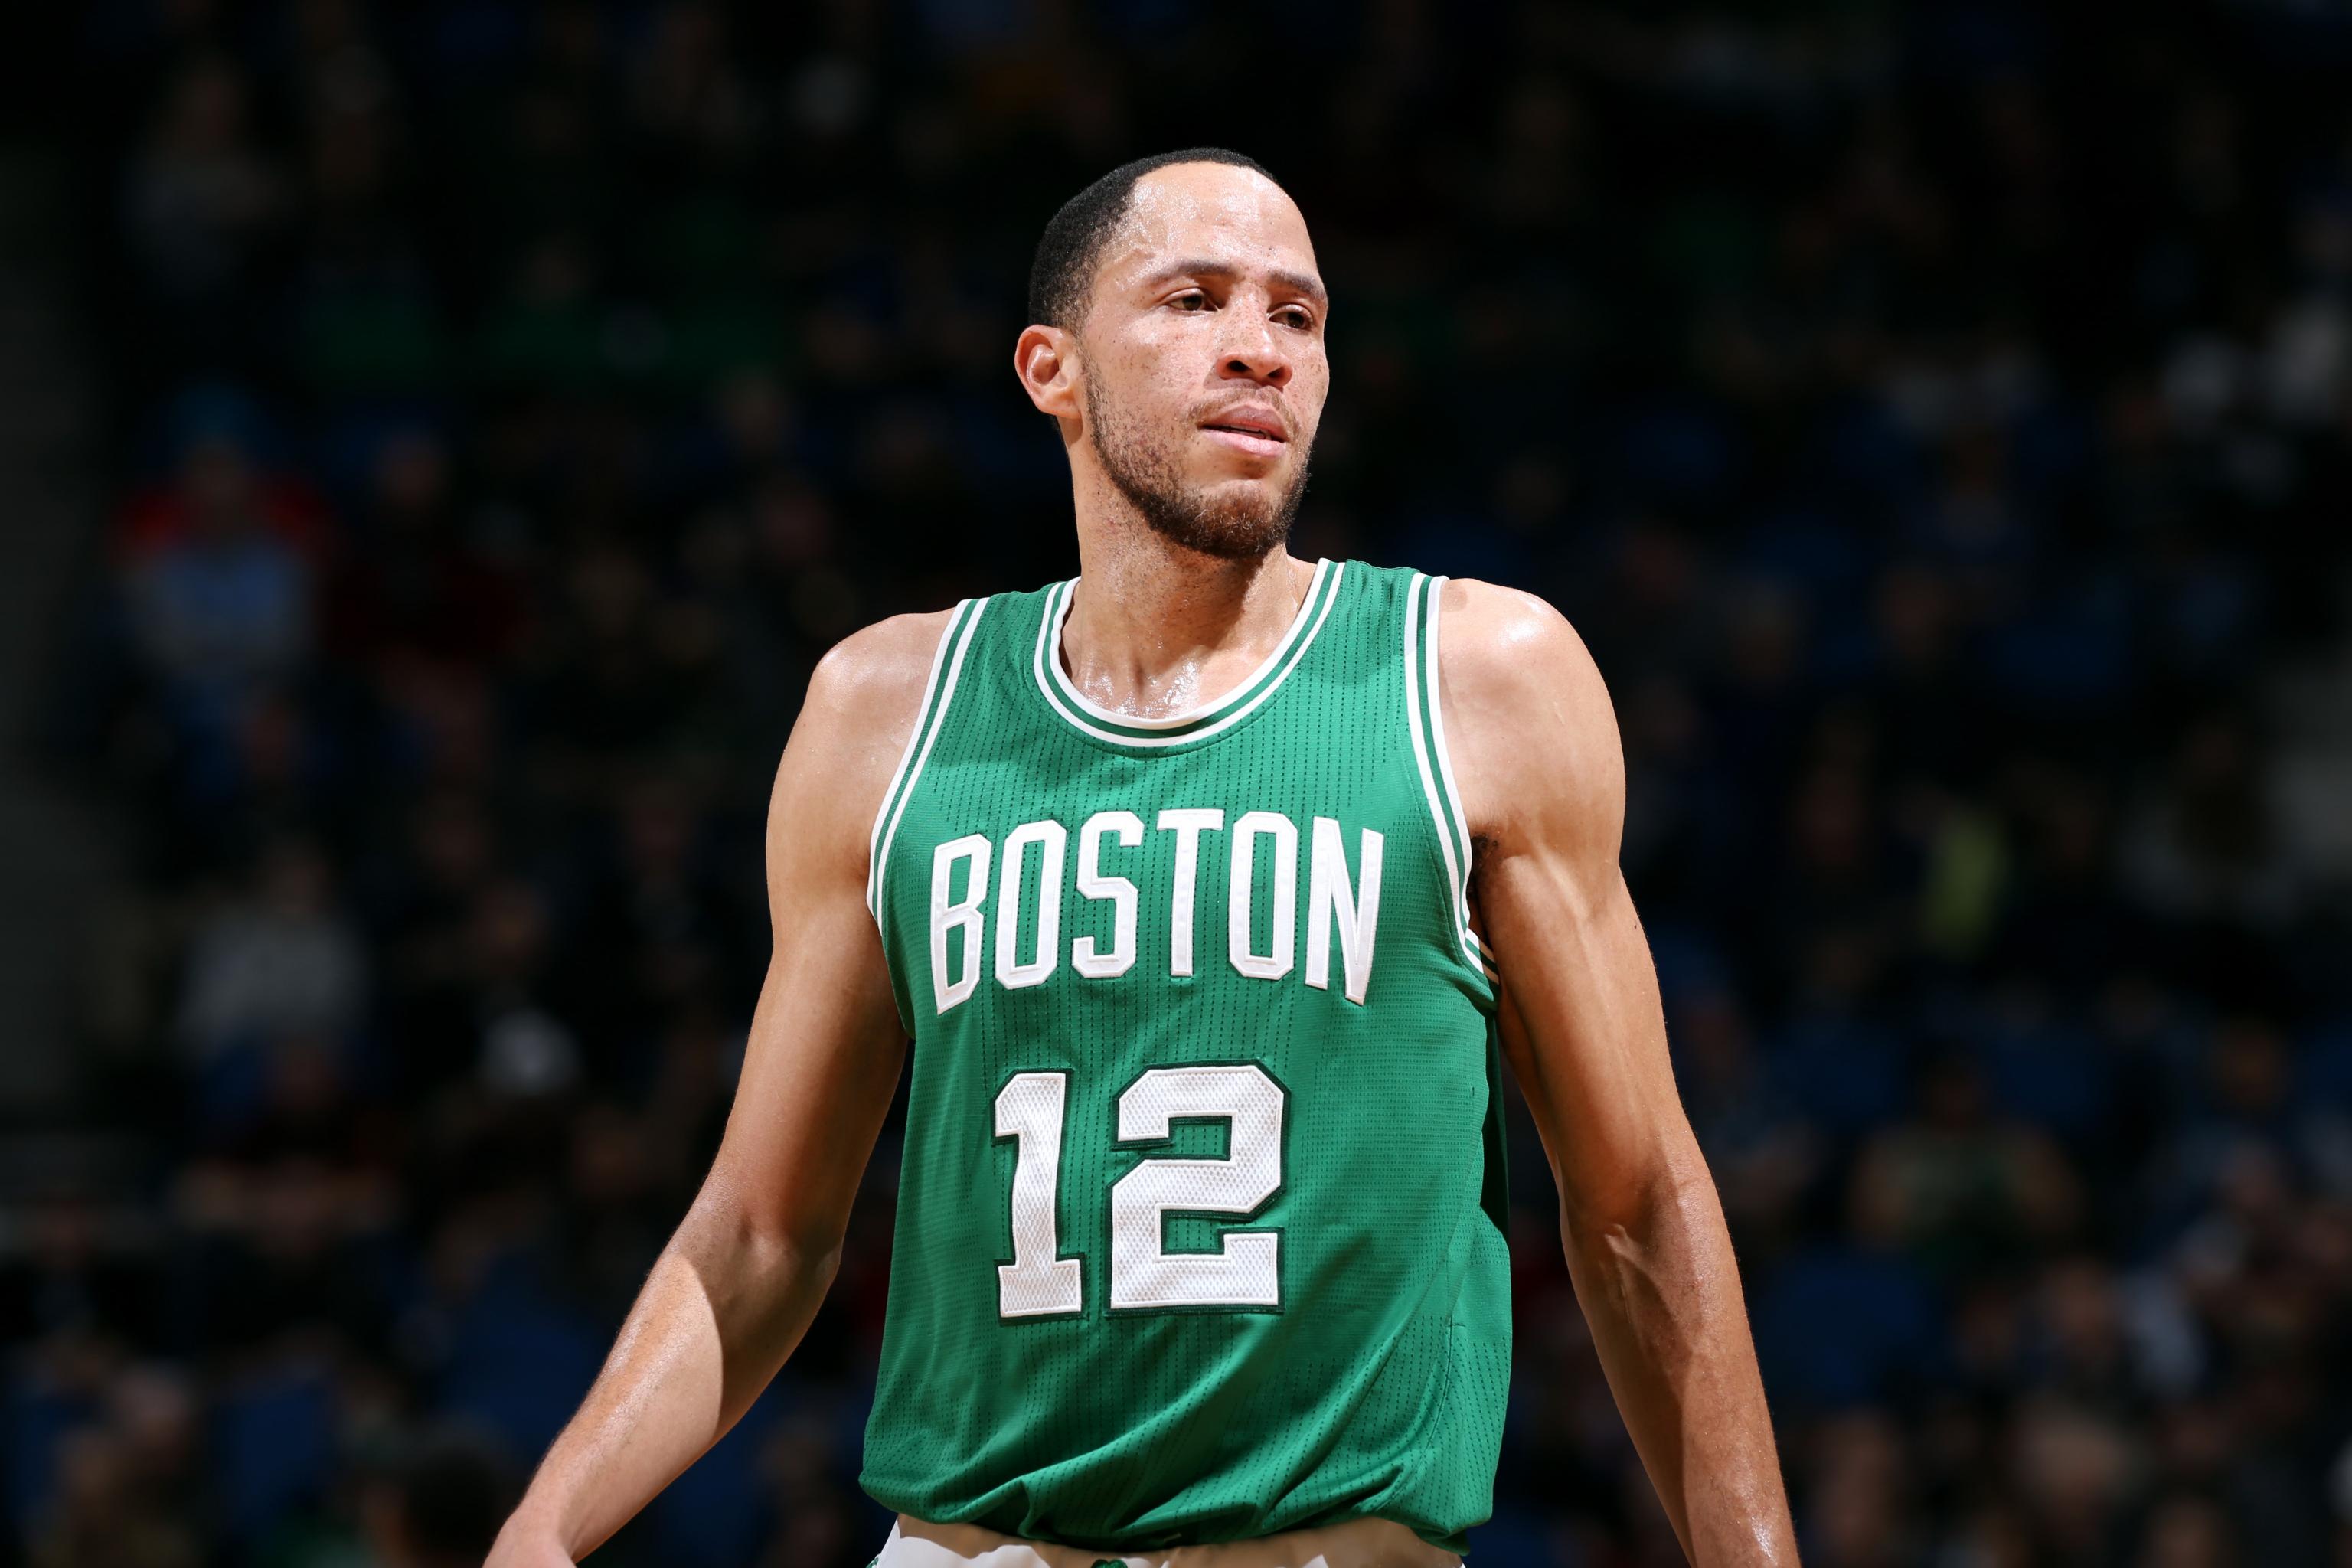 Tayshaun Prince shocked at being traded; will always remember friendships  made in Detroit 